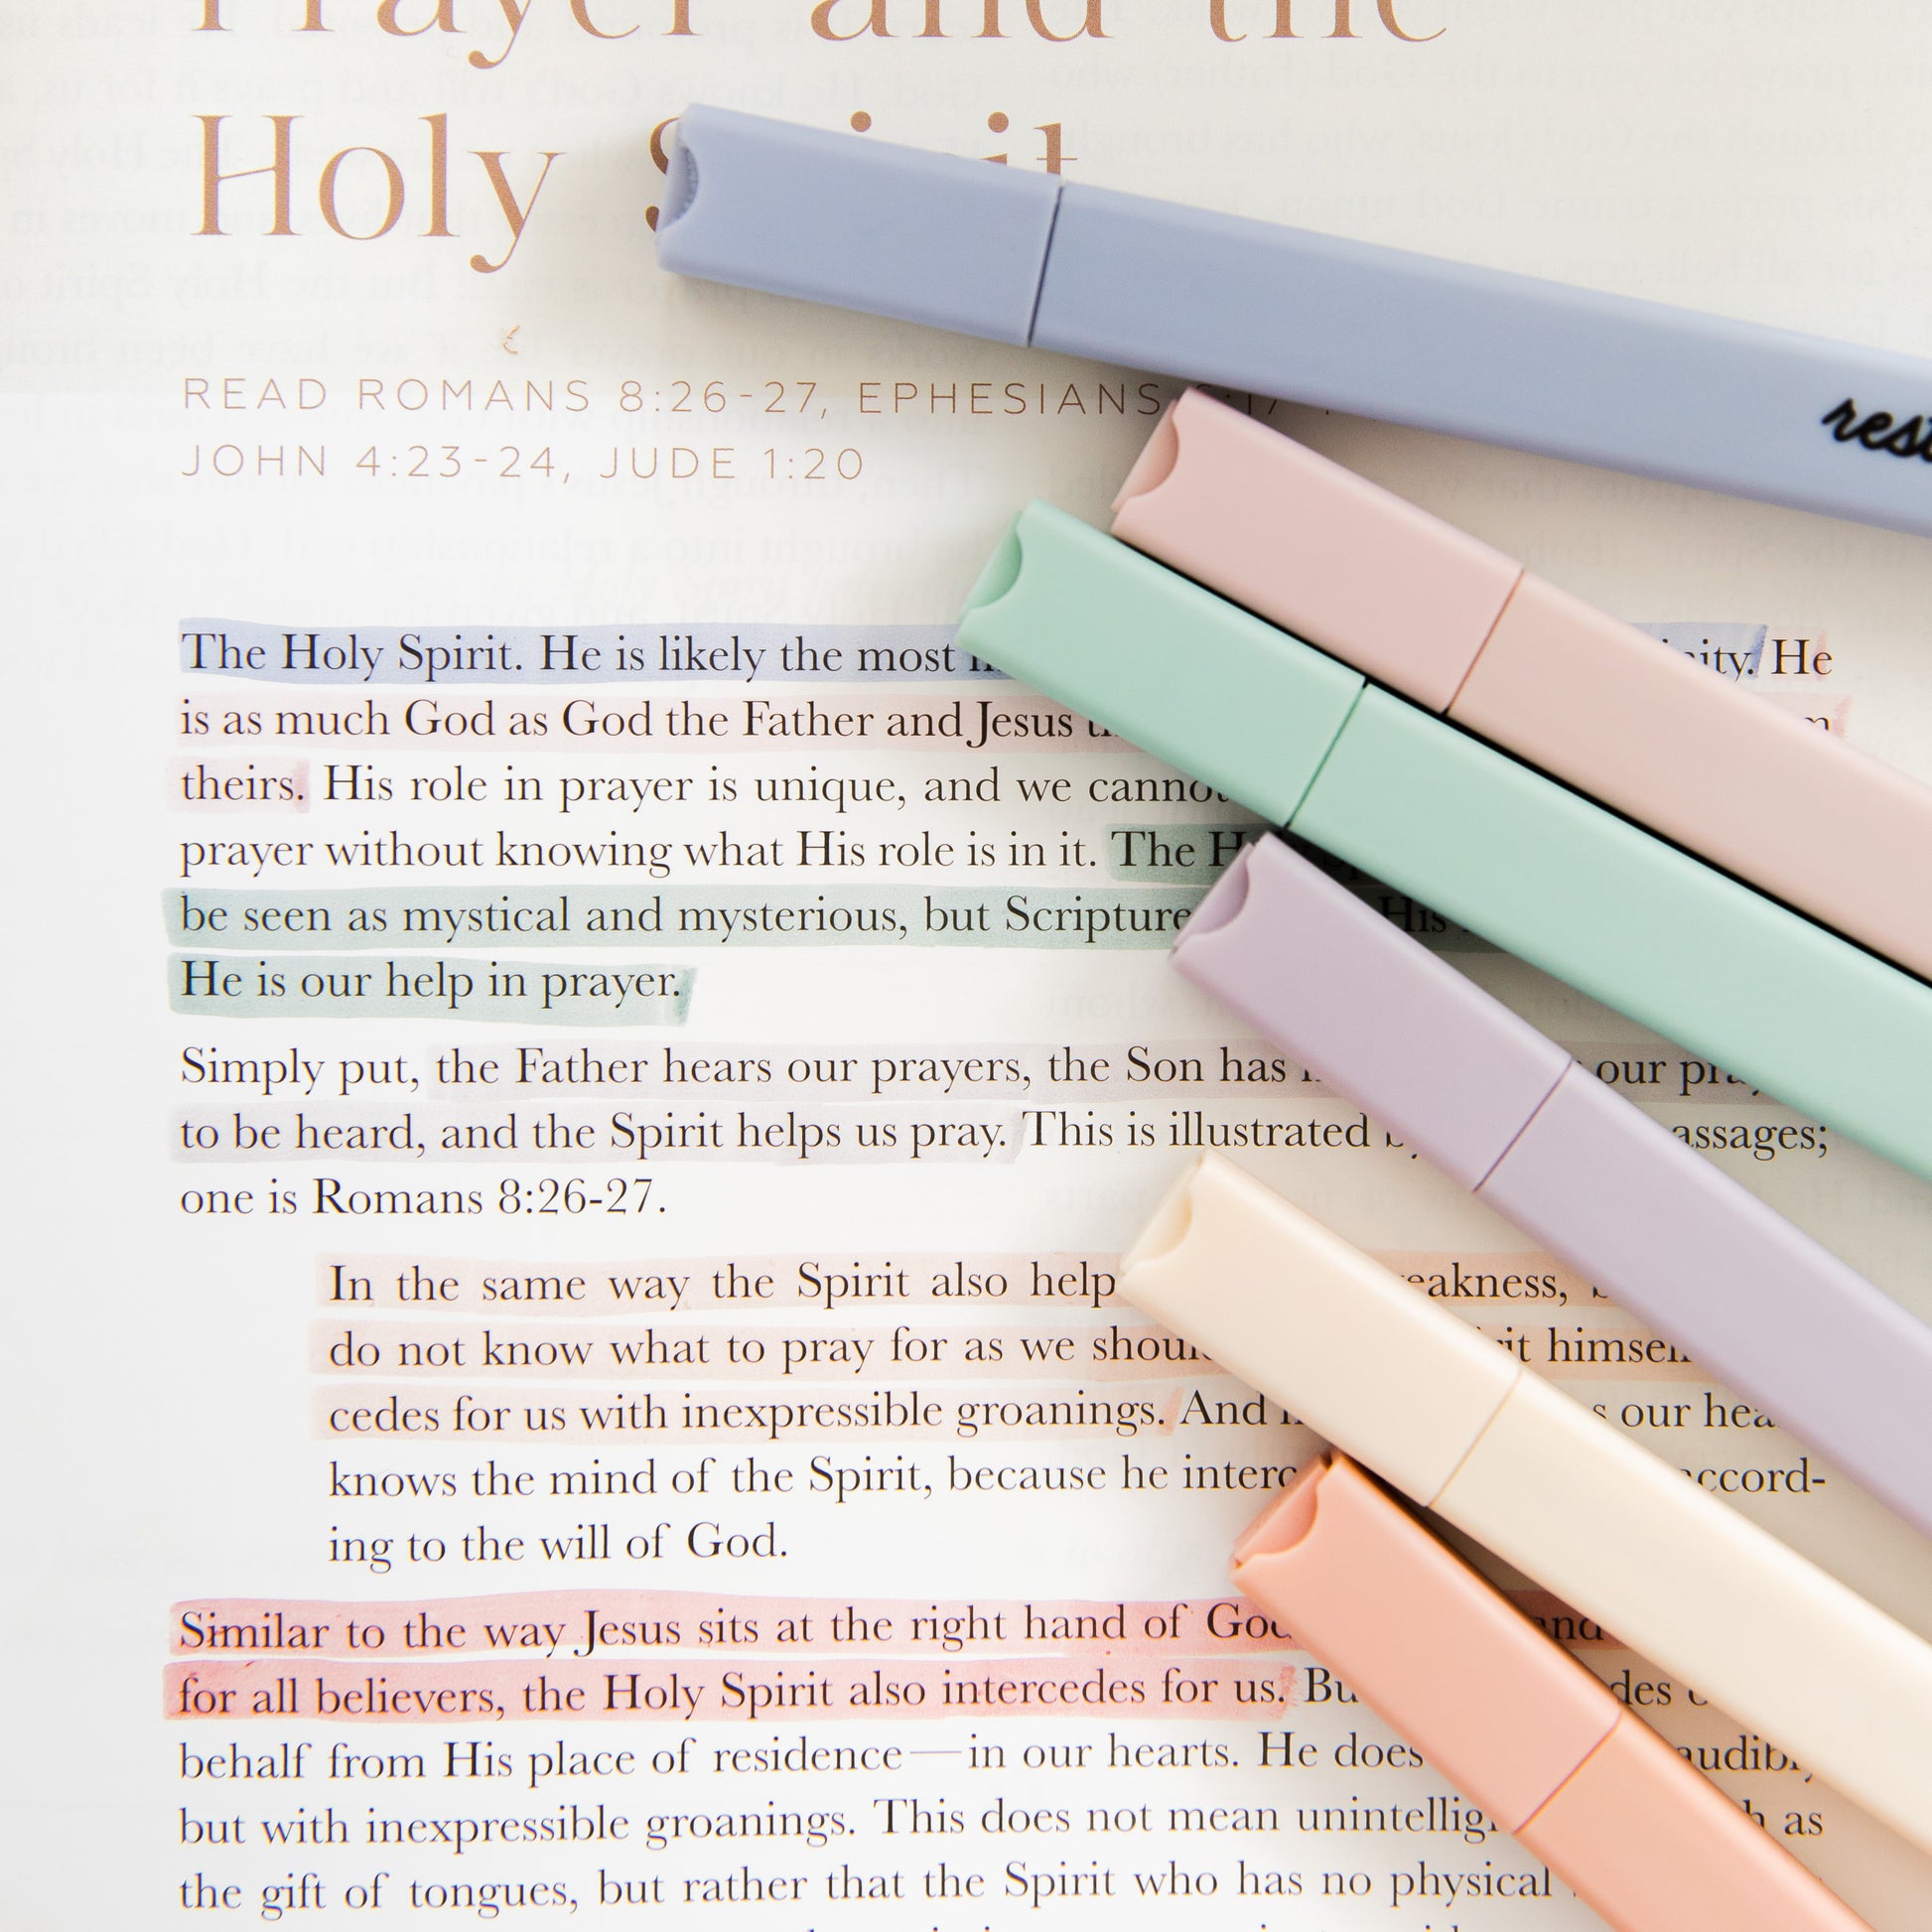 Bible Highlighters Muted Pastel Bible Highlighter Set No Bleed Through Highlighters  Bible Safe Markers Quick Dry Highlighters Gift 